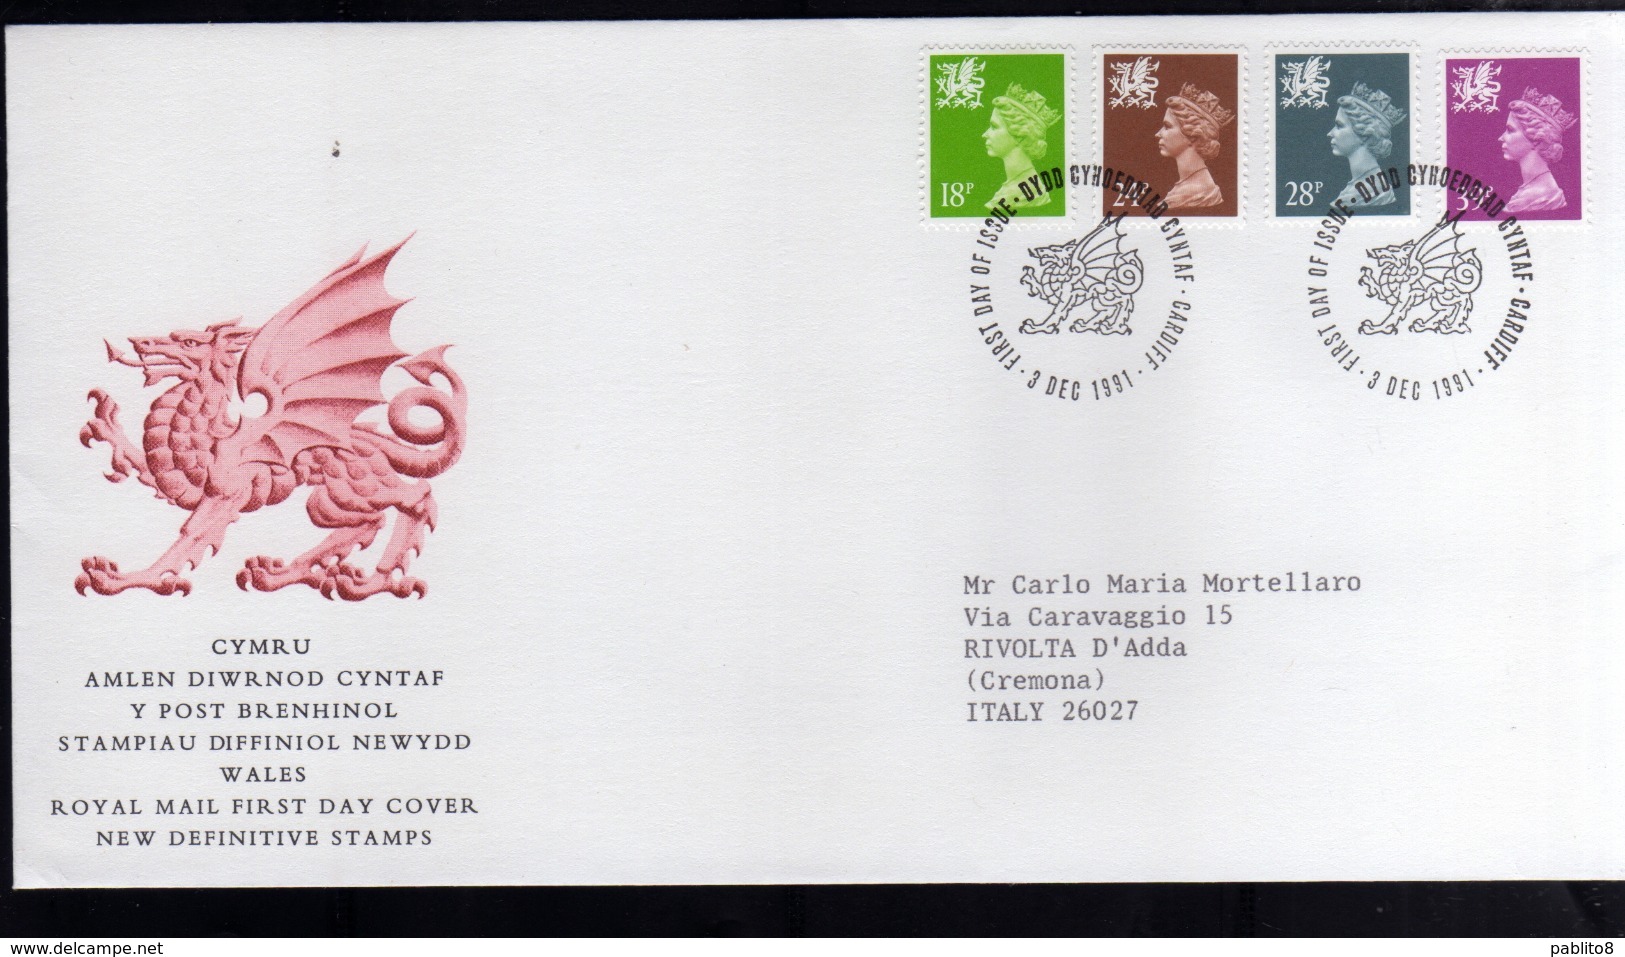 GREAT BRITAIN GRAN BRETAGNA 1991 DEFINITIVE STAMPS REGIONAL WALES FDC FIRST DAY COVER - 1991-2000 Decimal Issues